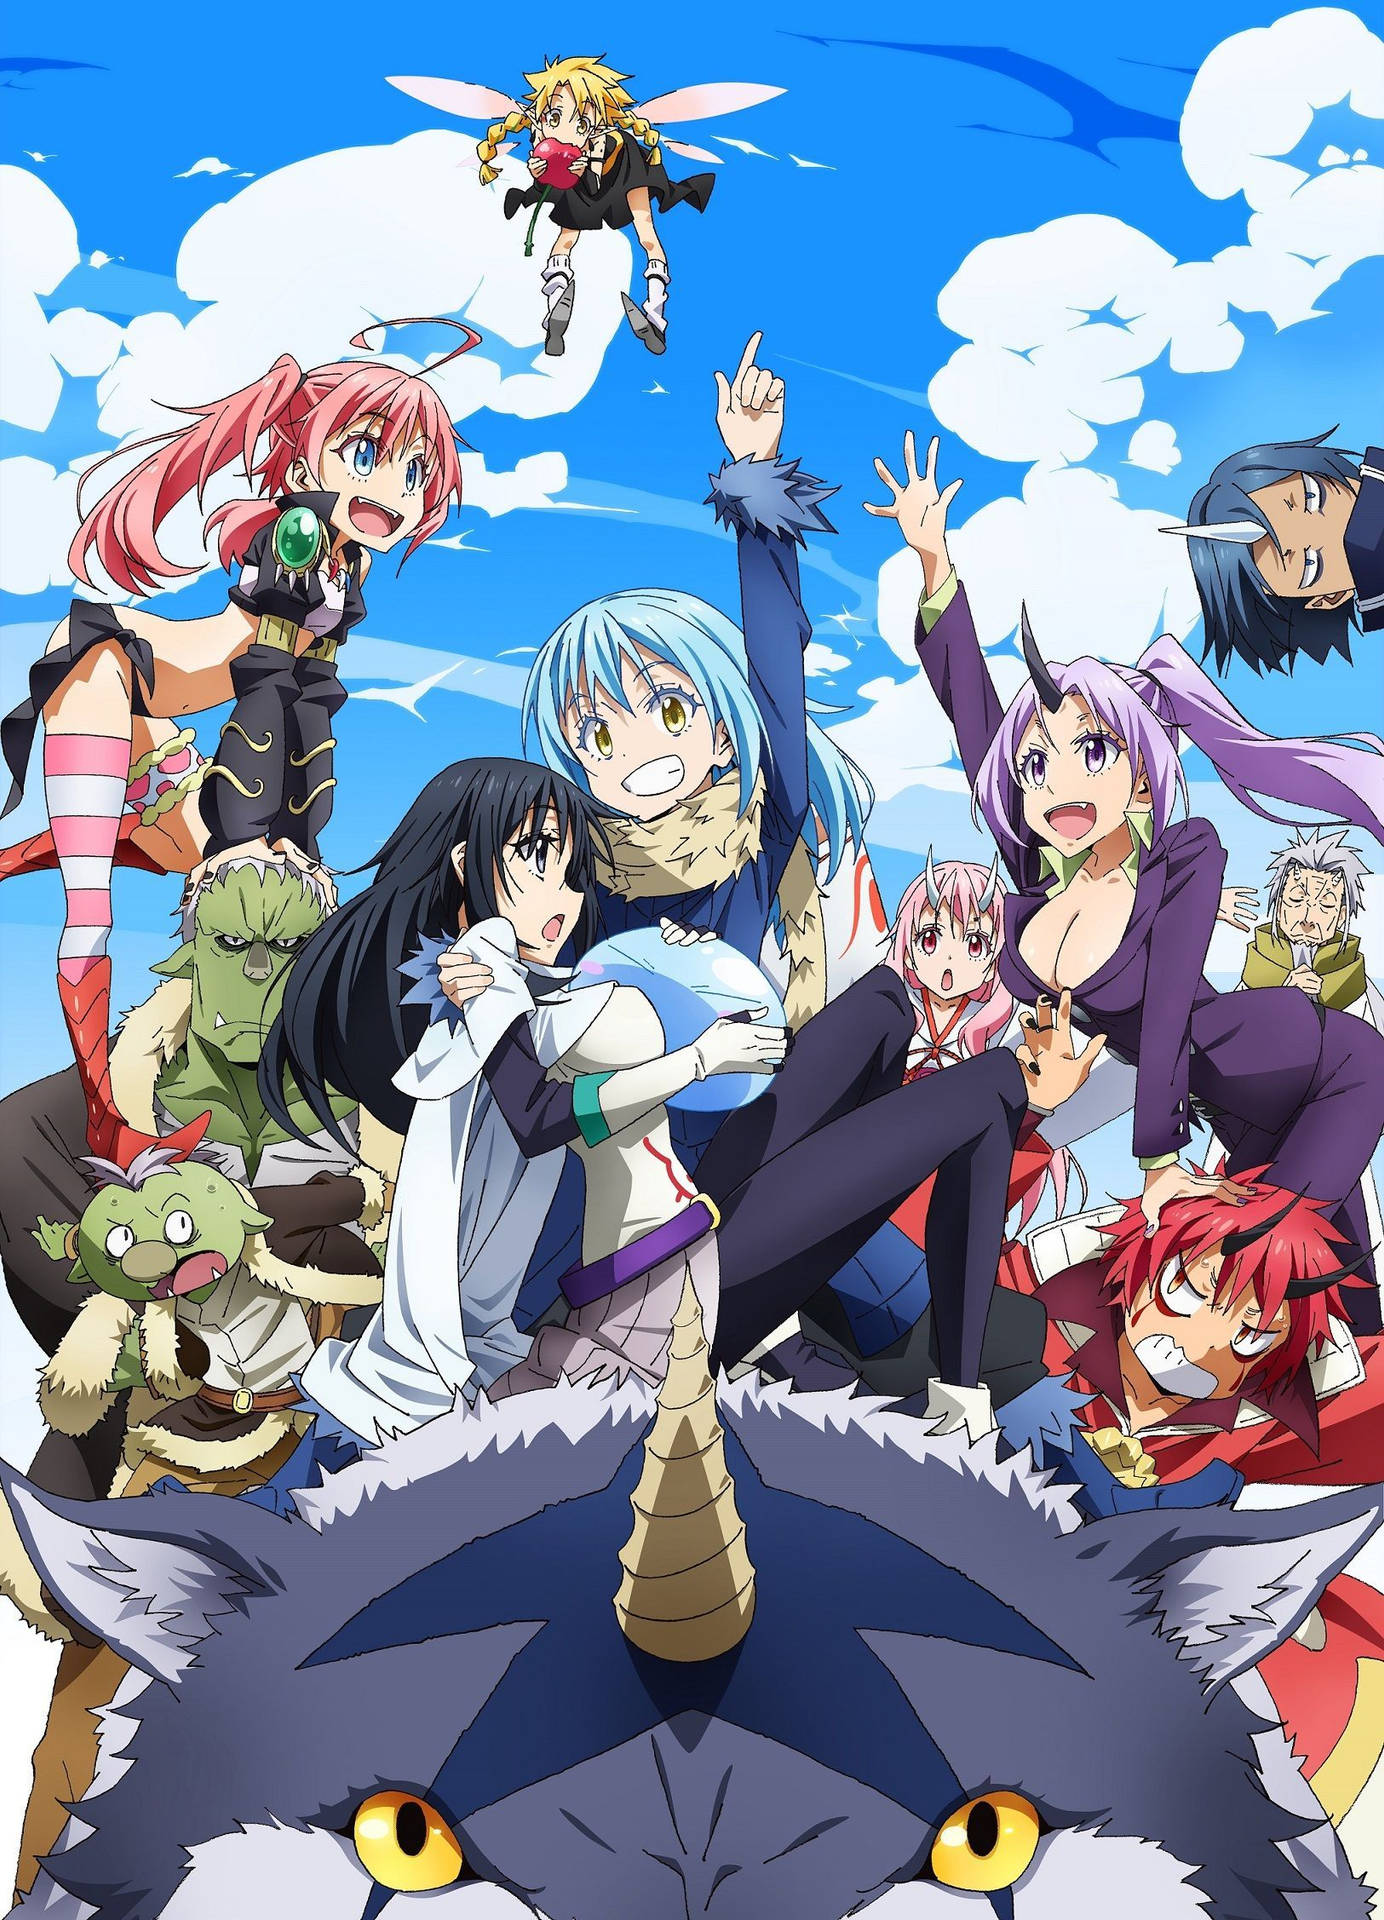 Free That Time I Got Reincarnated As A Slime Wallpaper Downloads, [100+]  That Time I Got Reincarnated As A Slime Wallpapers for FREE 